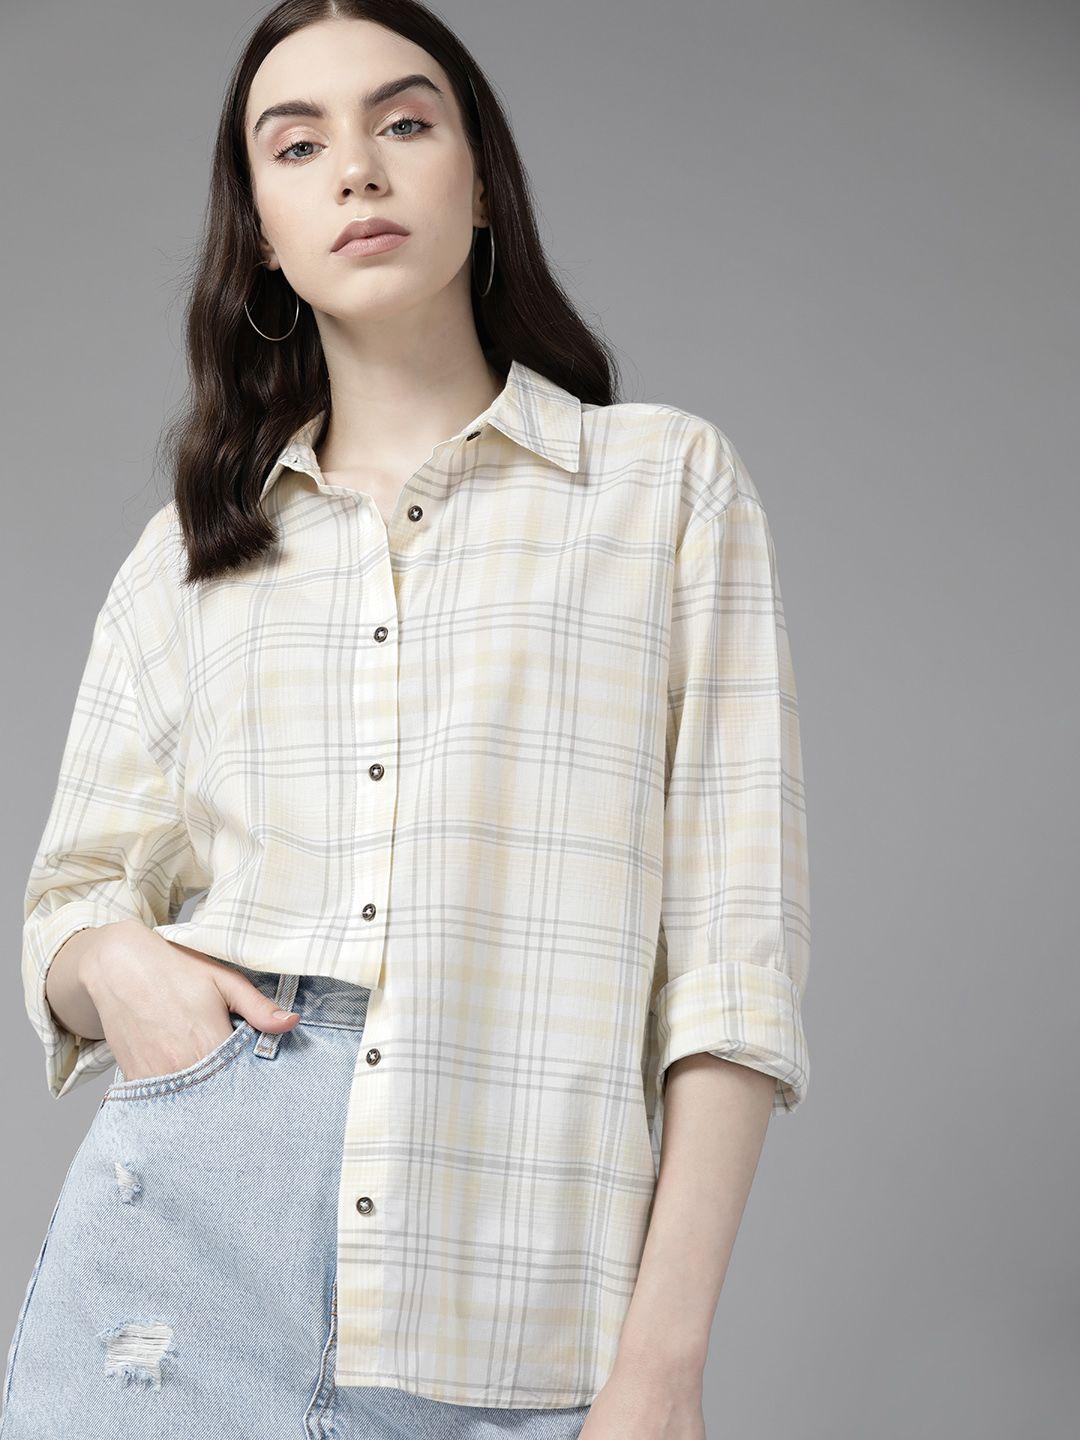 the roadster lifestyle co. pure cotton tartan checked casual shirt